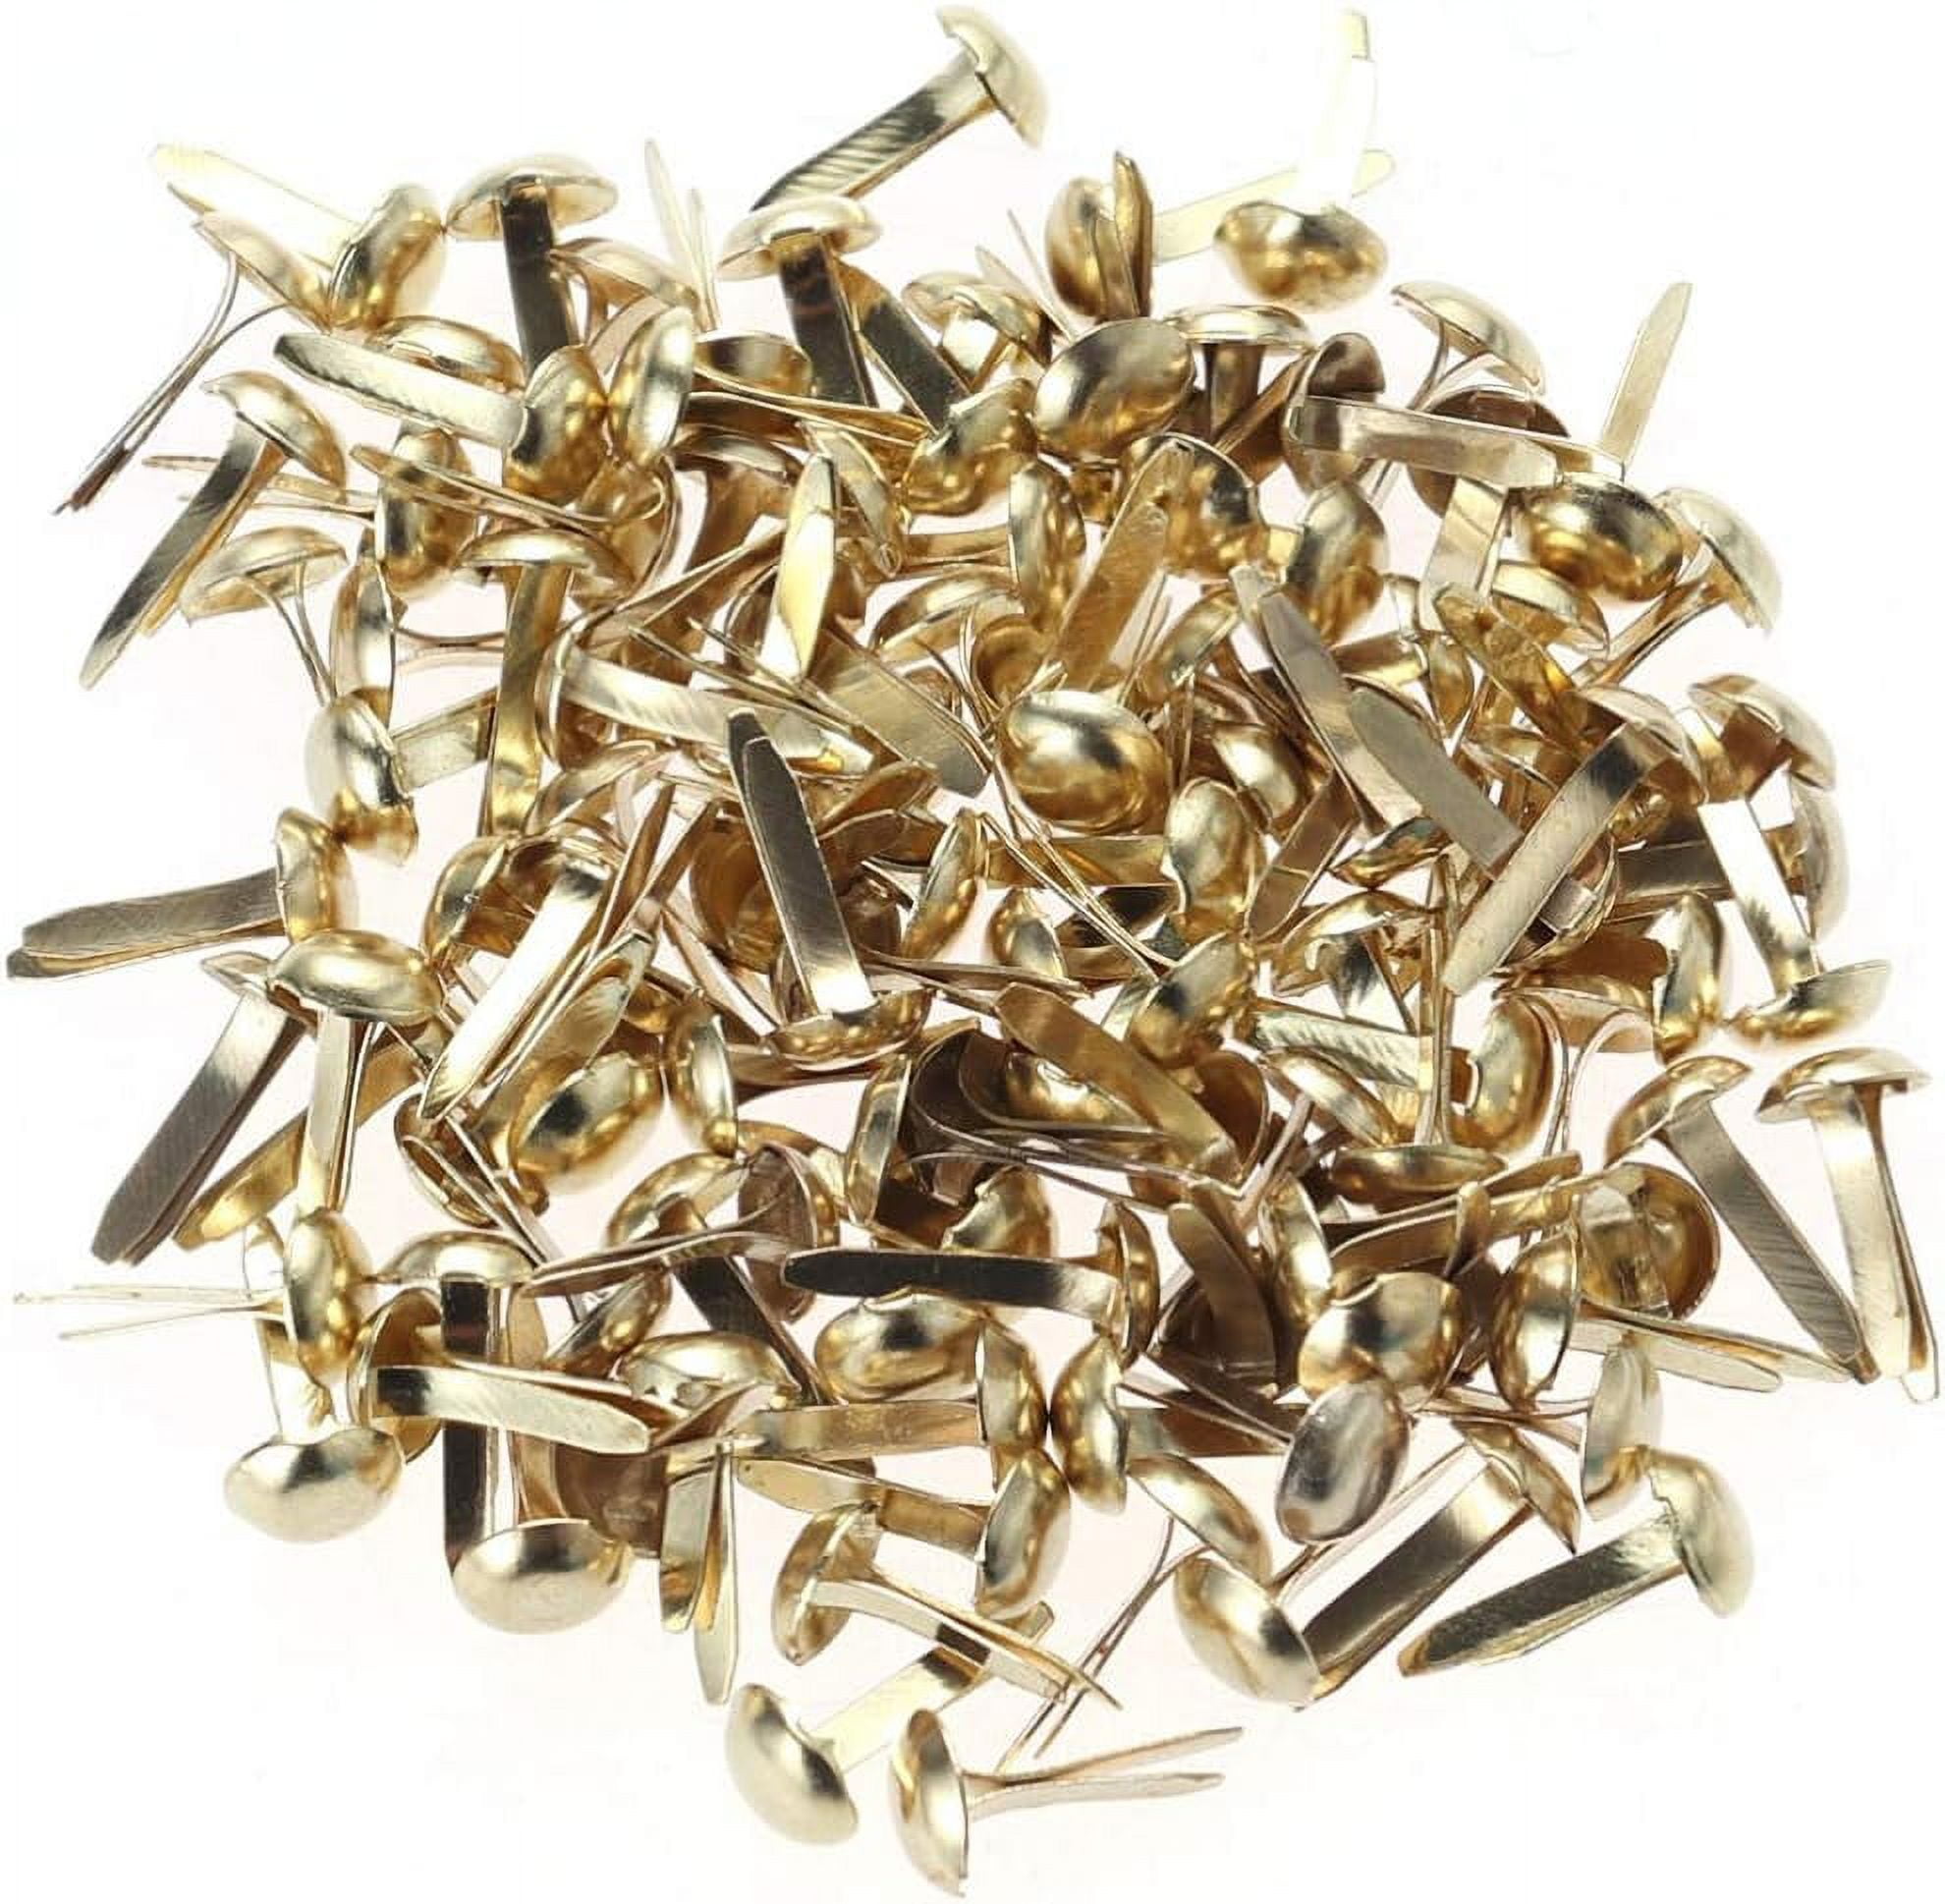 EXCEART 1500 Pcs Metal Paper Fastener Mini Metal Brads Prong Fasteners  Paper Fasteners for Crafts Arts and Crafts for Kids Gold Bra Paper Brads  Clips